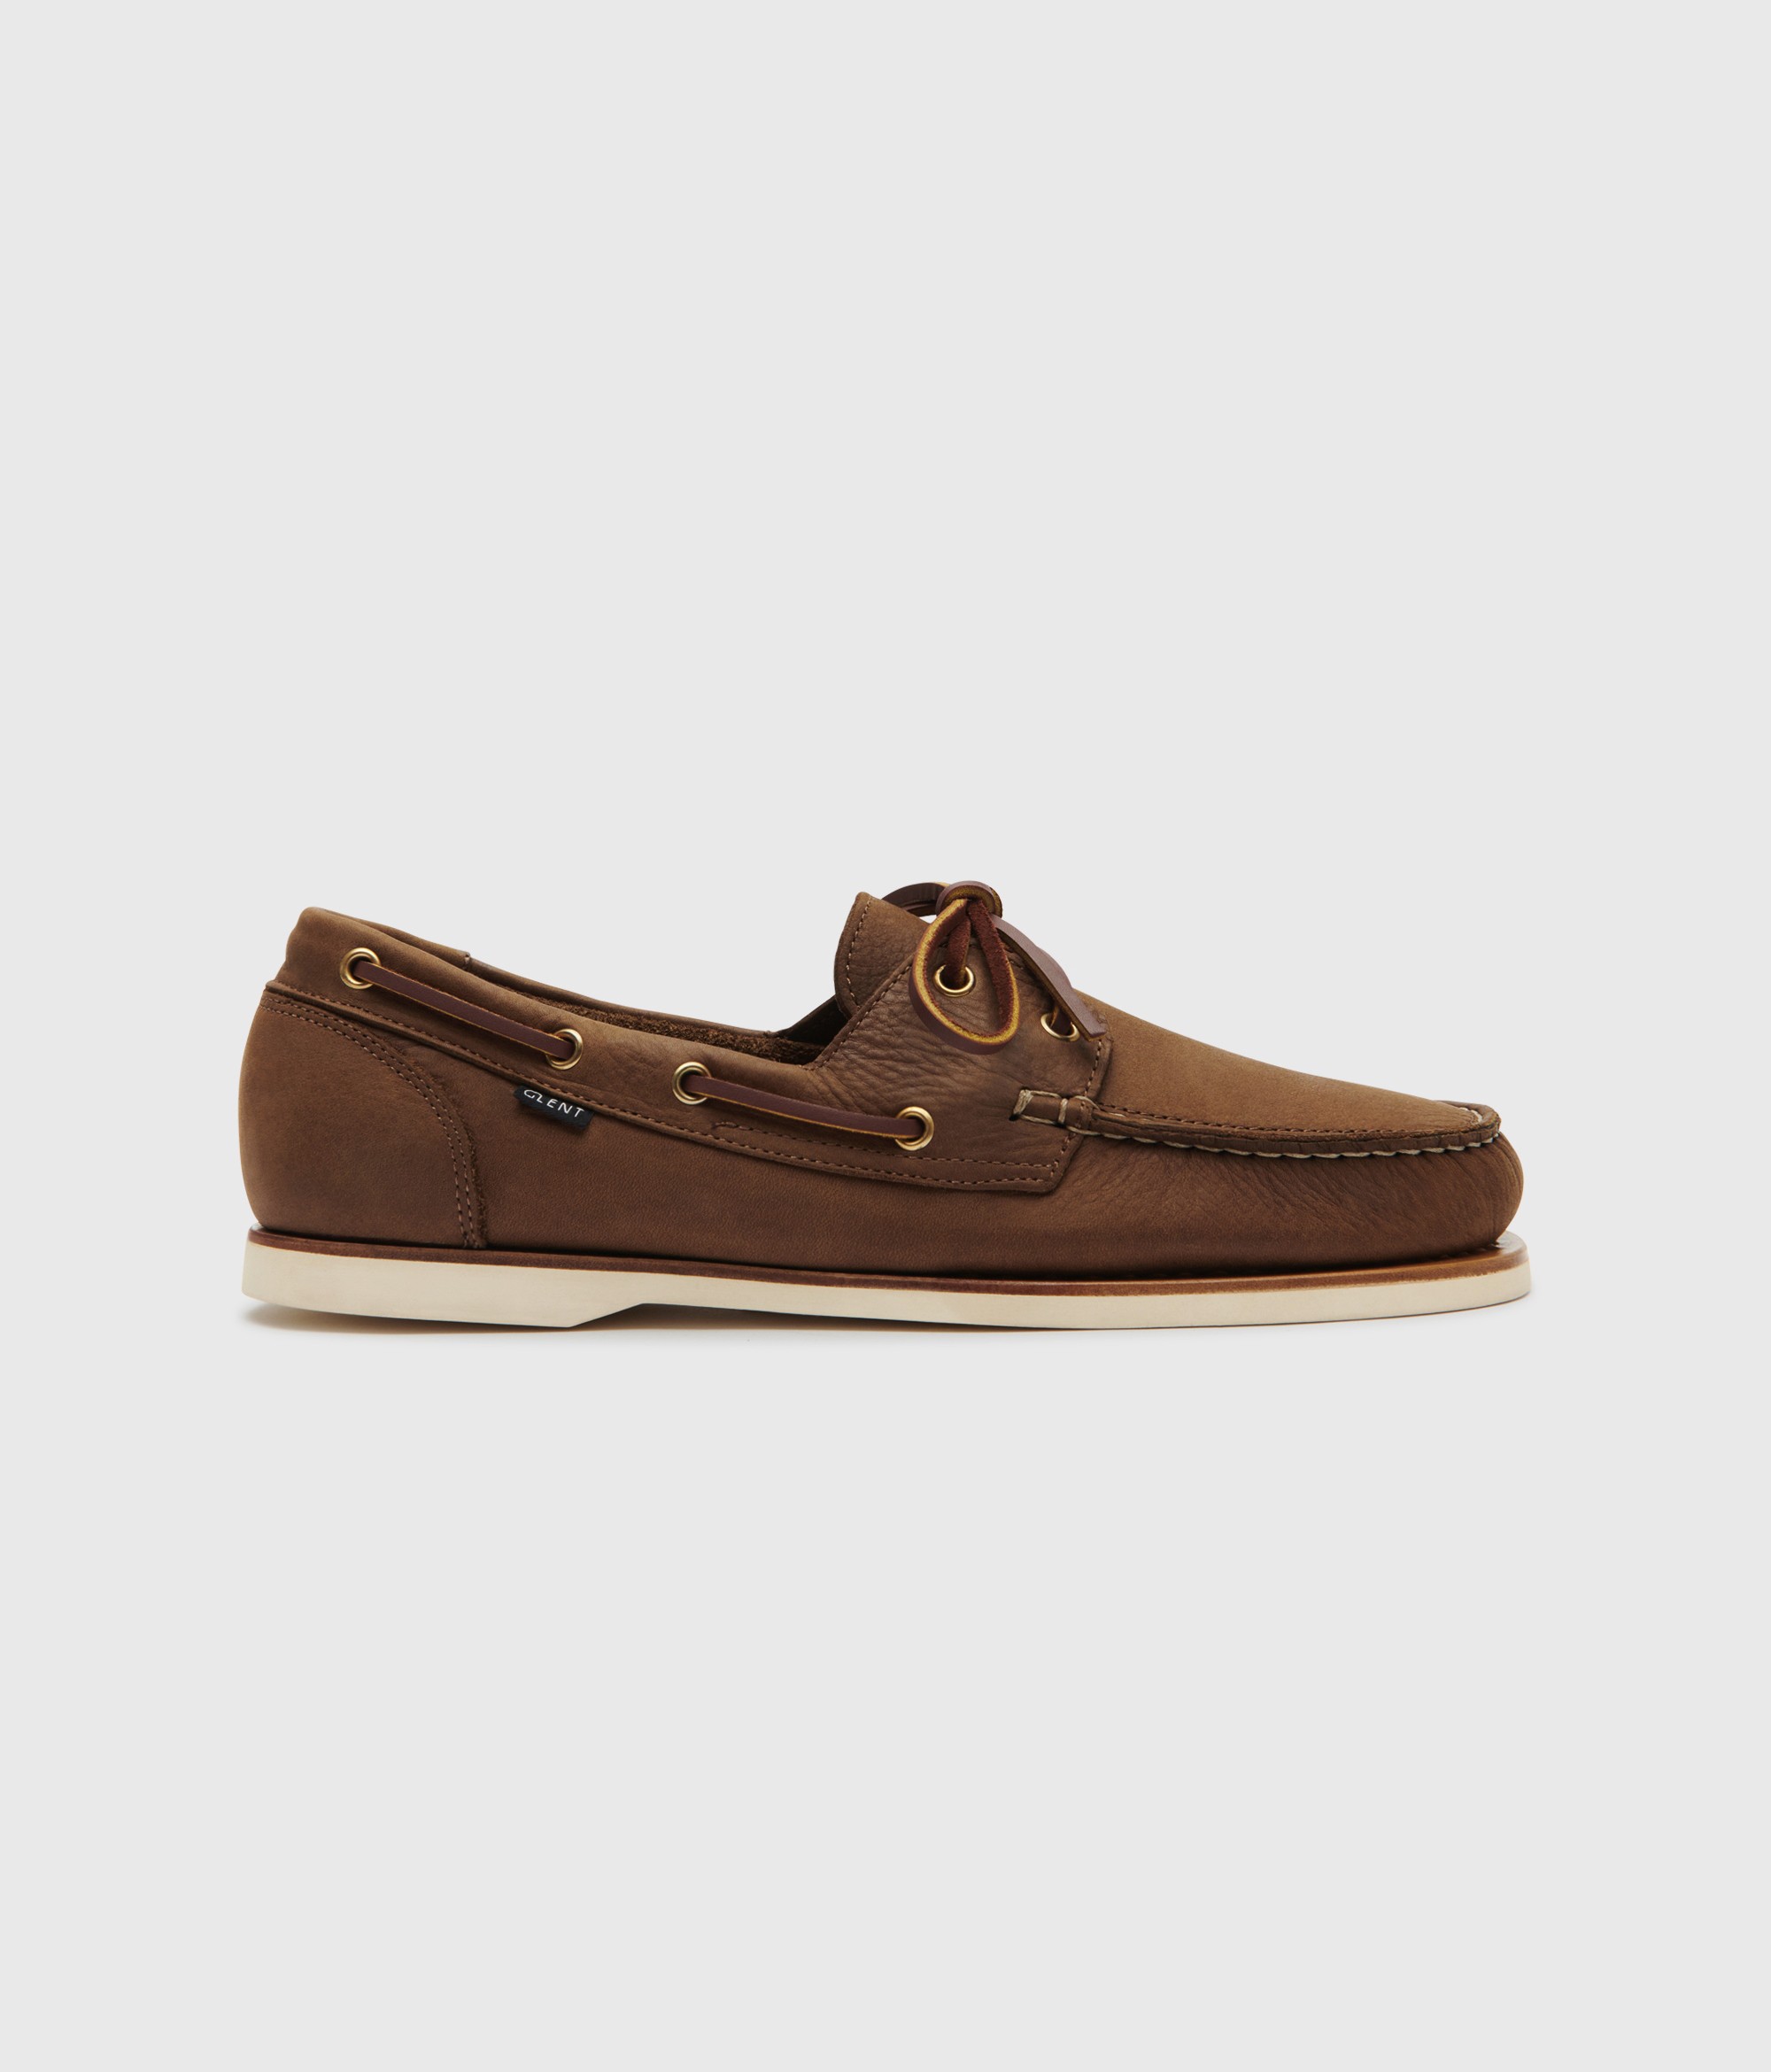 Boat shoe with Vibram sole